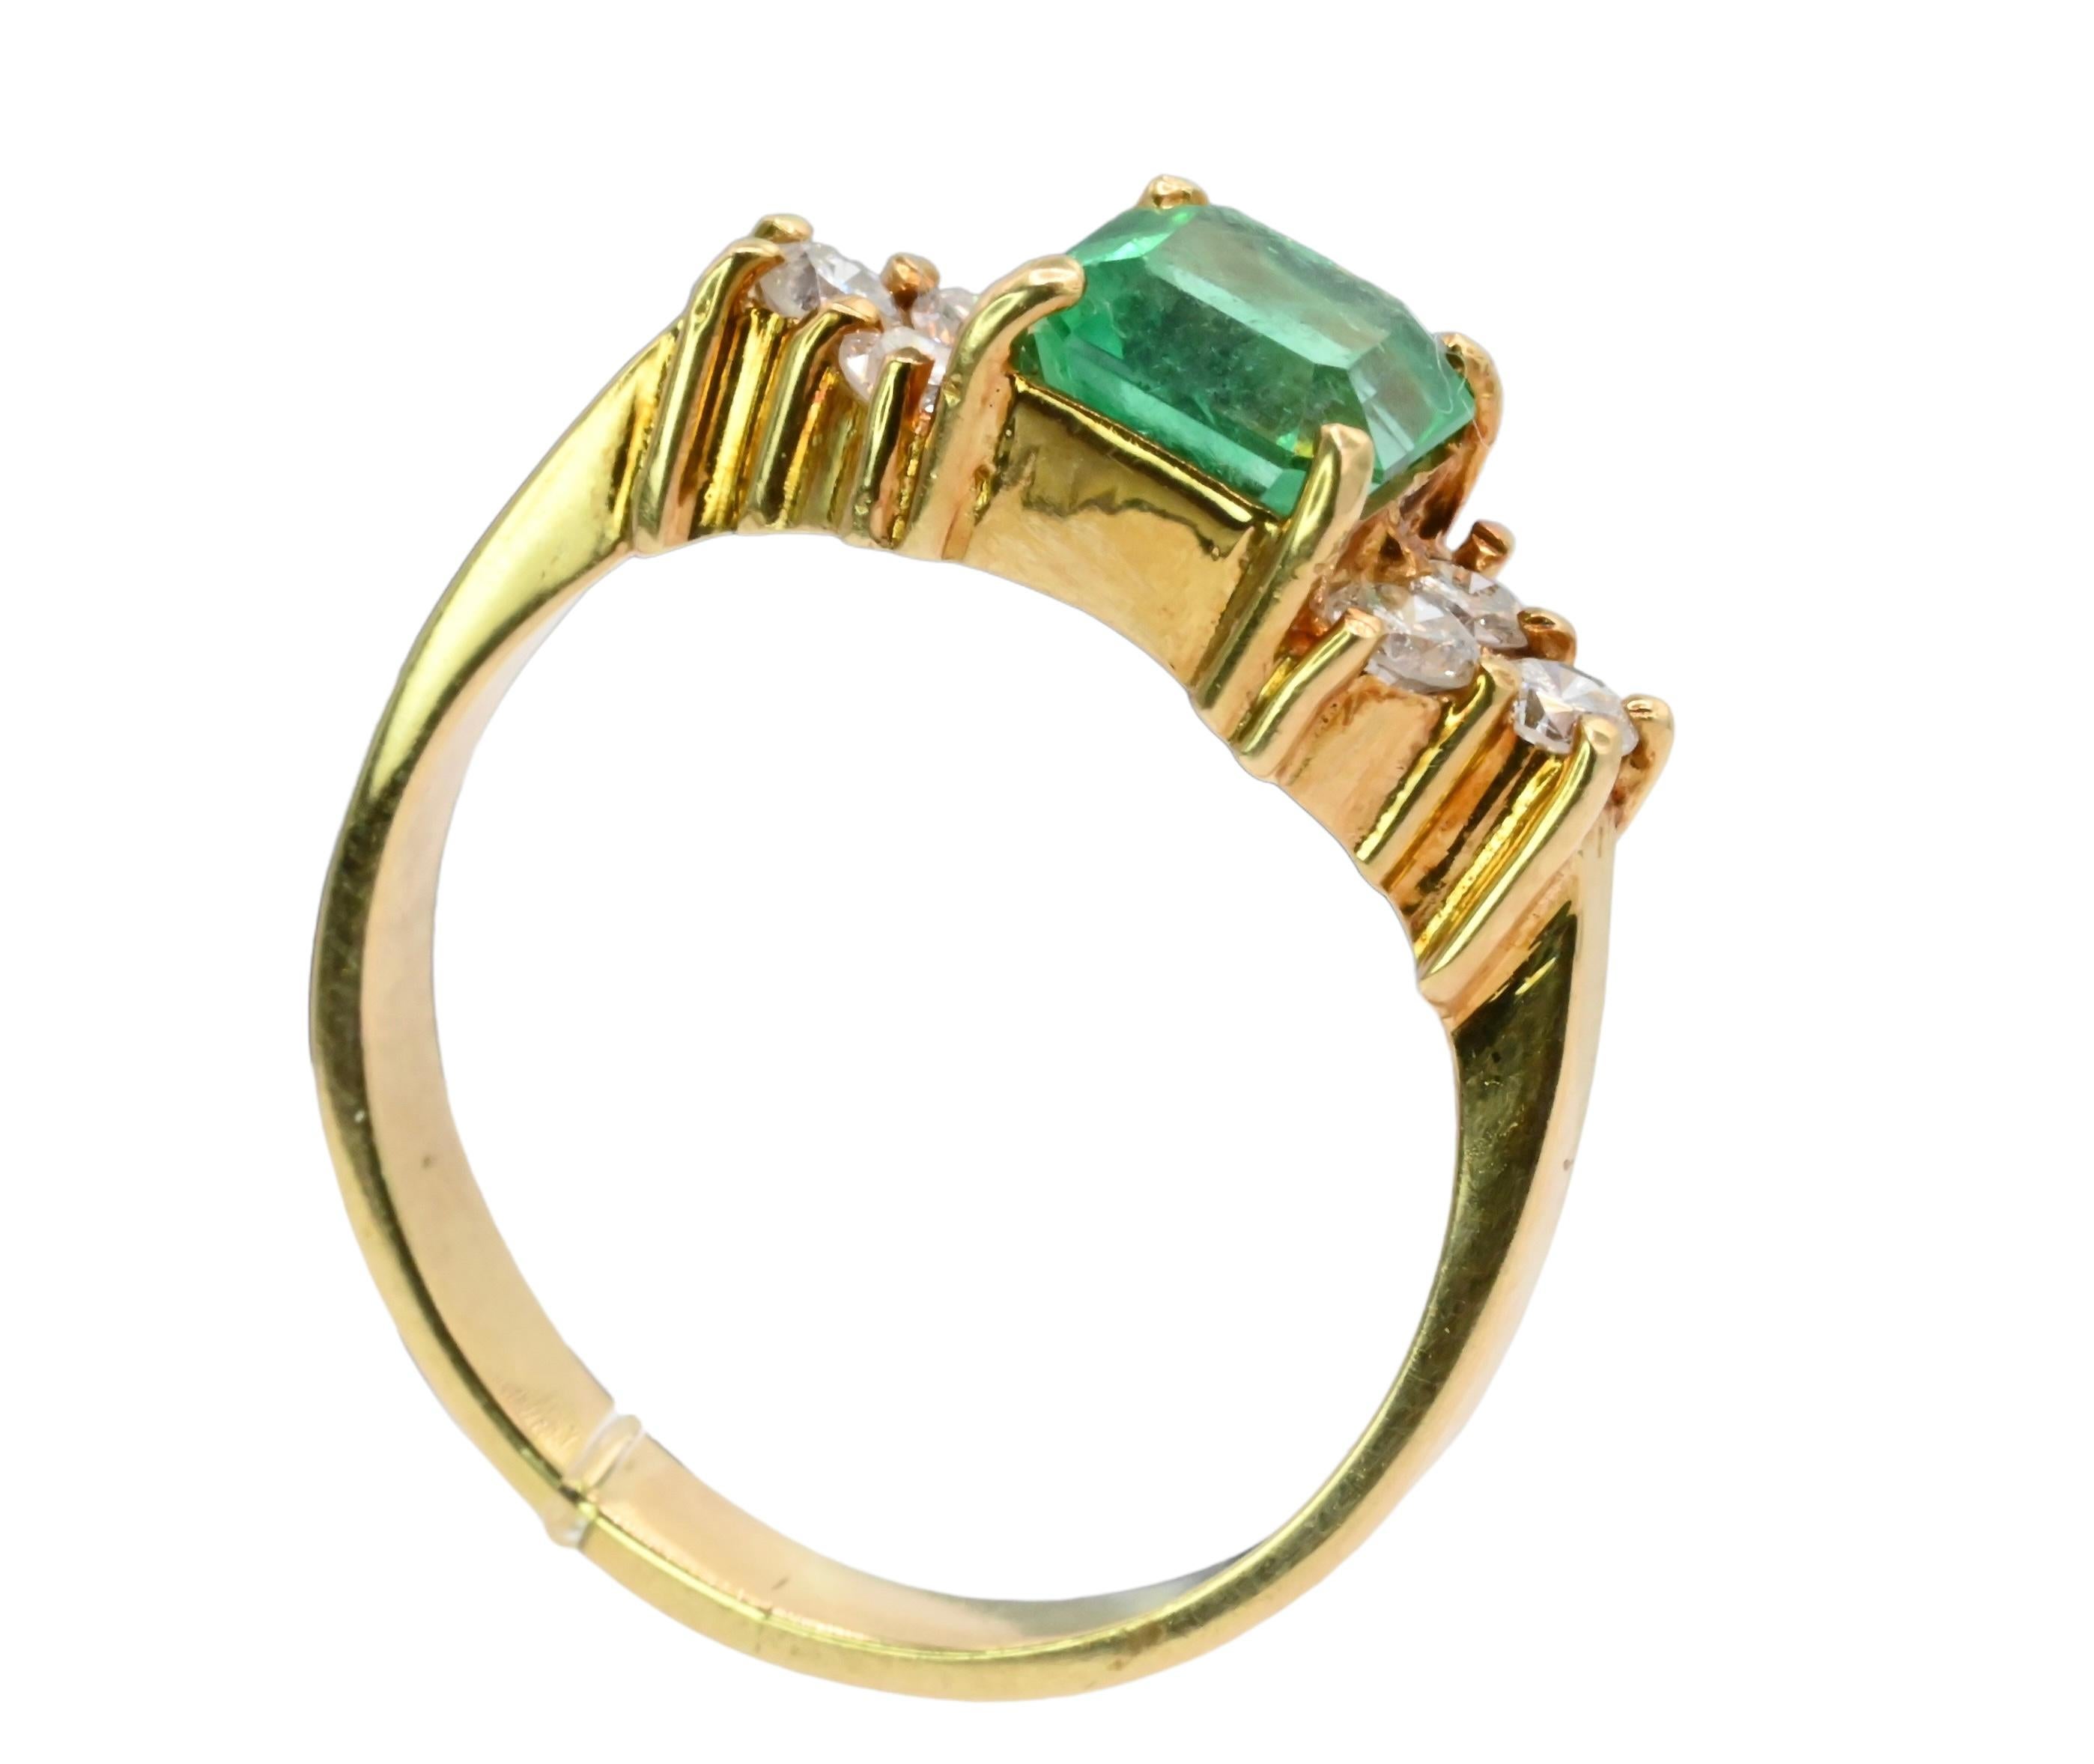 This is a fabulous emerald and diamond ring. The ring consist of approximately a 1.25 carat emerald center stone. It has such a vivid lush green color. There are six accent diamonds on the sides, eacg diamond is around .10 carats. Quality of the